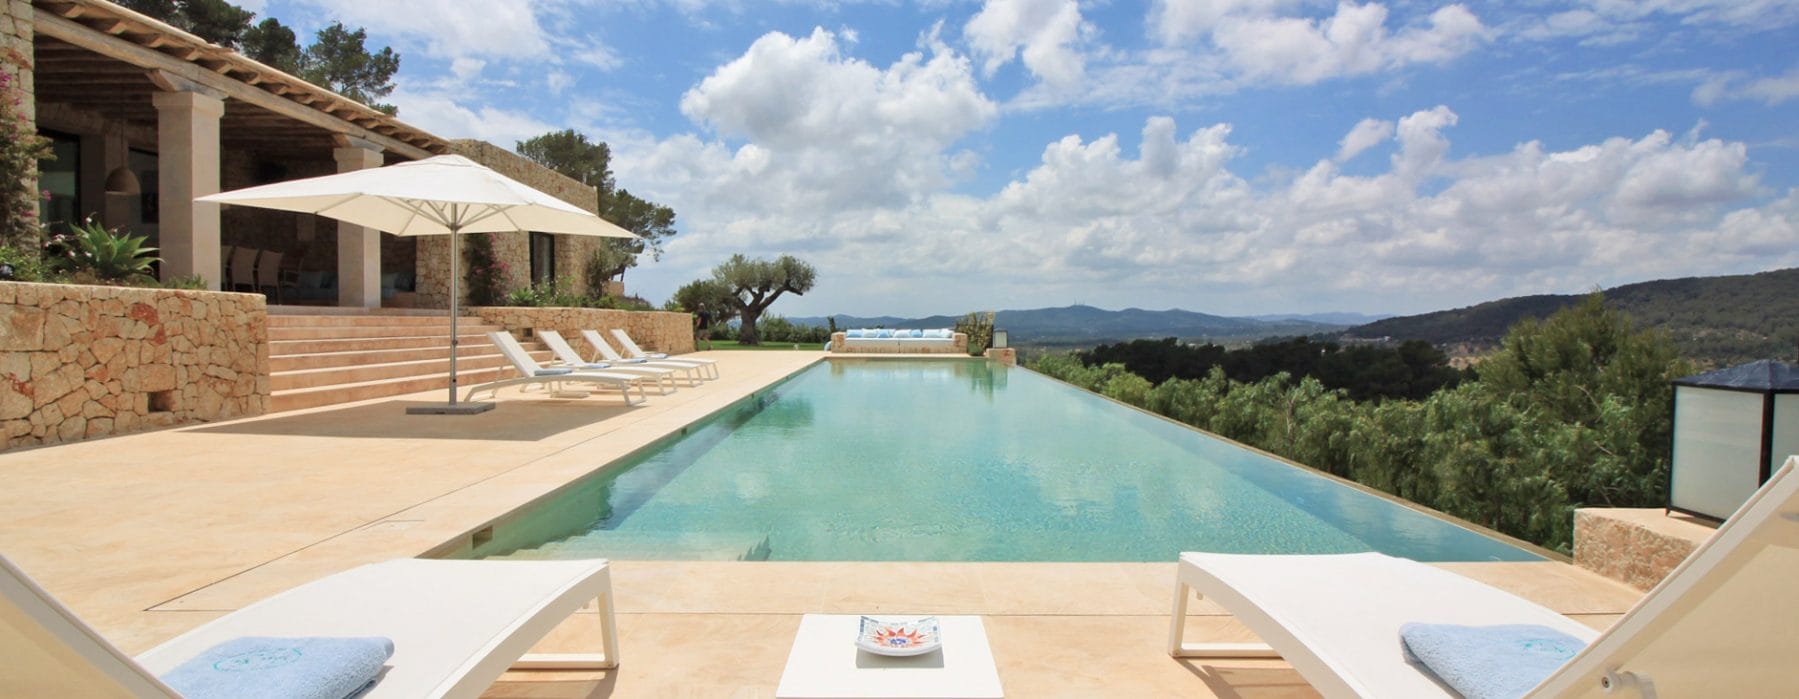 At the infinity pool you can look over the landscape